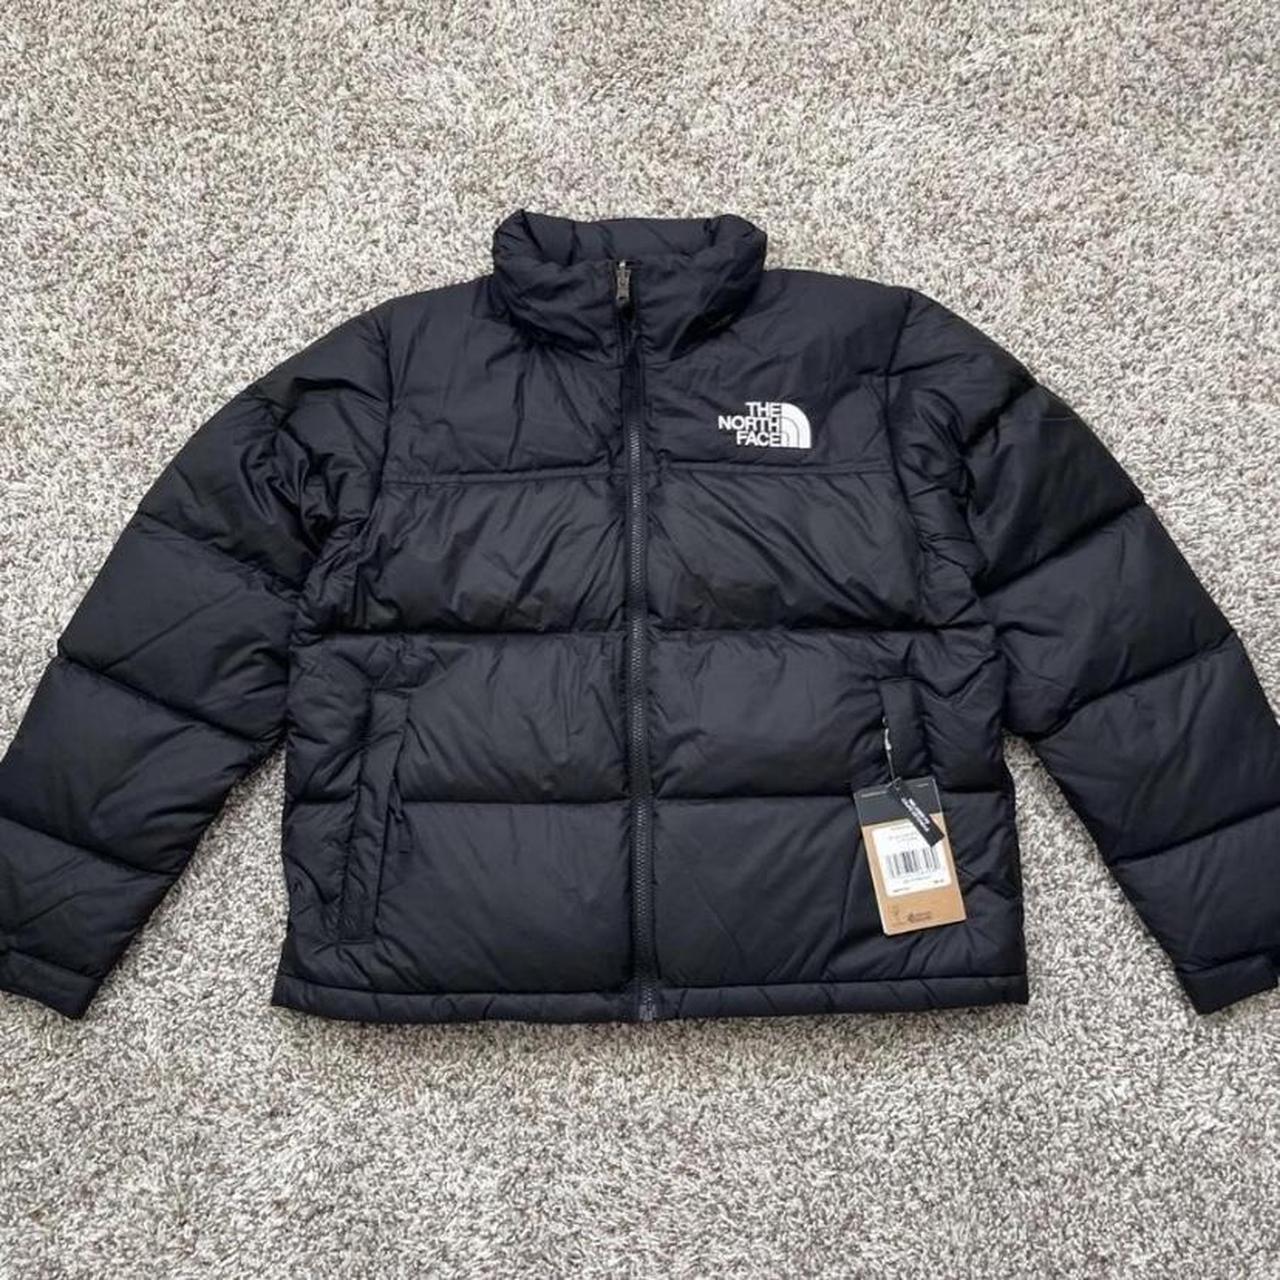 North face puffer DM before buy New - Depop